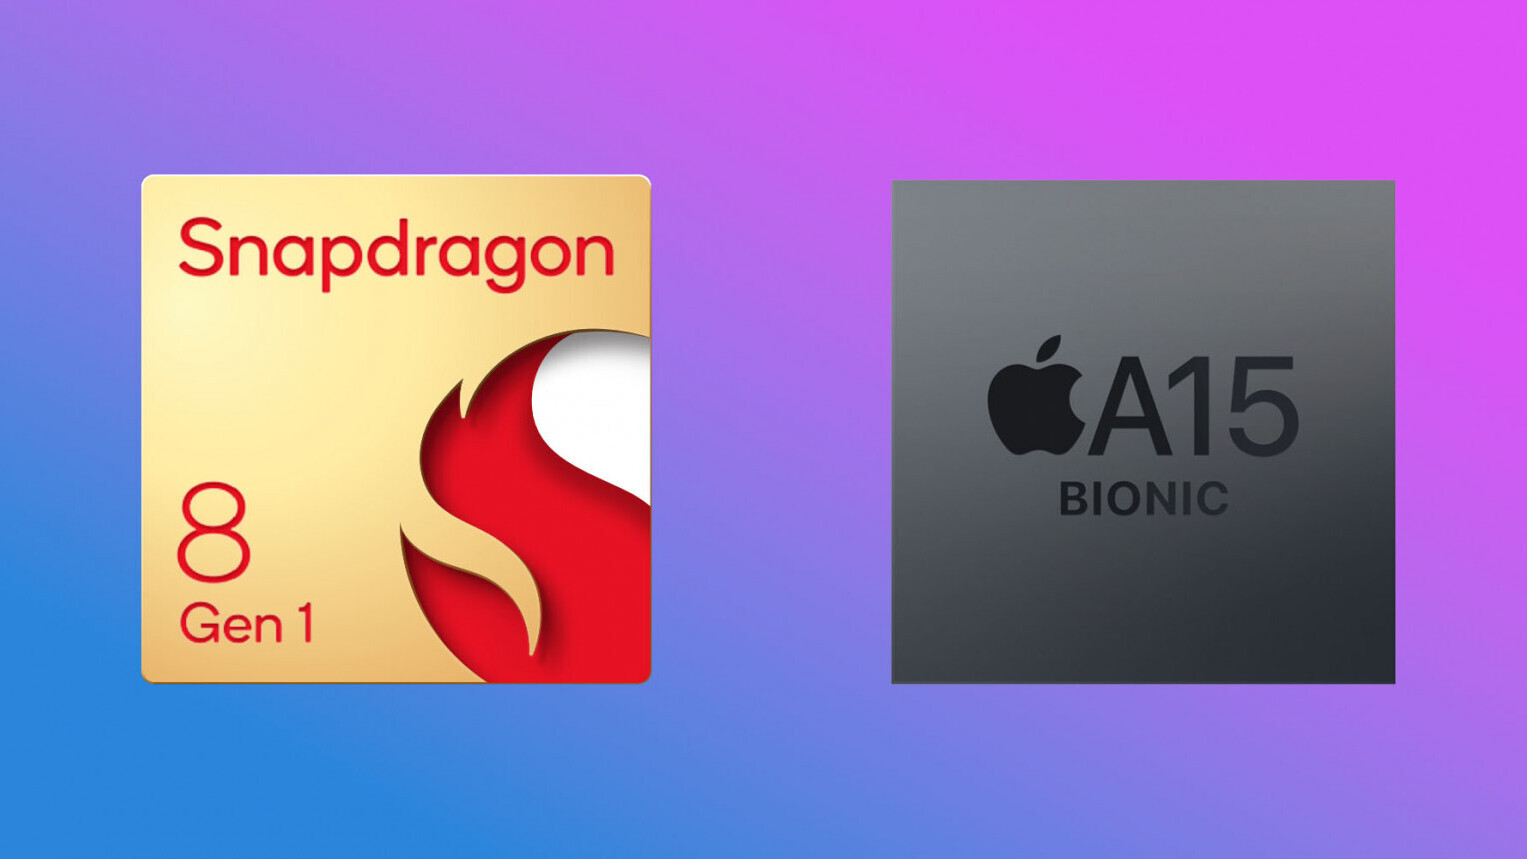 First Snapdragon 8 benchmarks show Qualcomm’s CPU still trails Apple